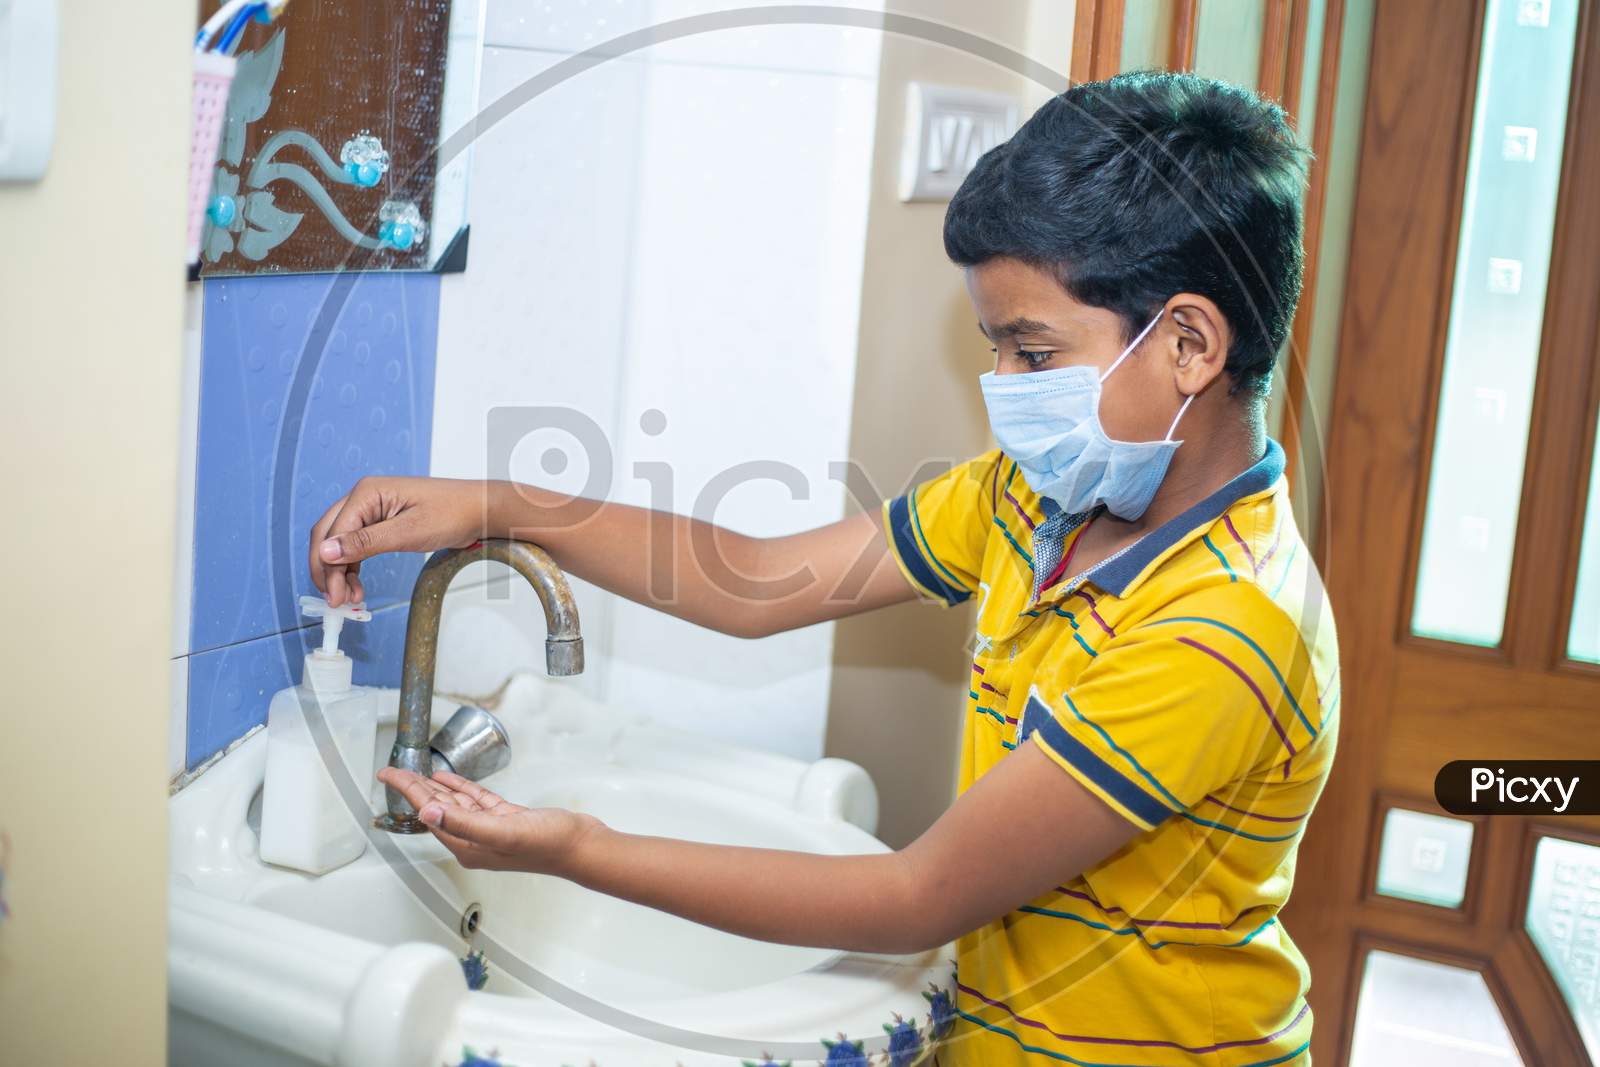 Kid Wearing Mask Washing Hands With Alcohol Gel Or Antibacterial Soap Sanitizer, Hygiene Concept. Prevent The Spread Of Germs And Bacteria And Avoid Infections Corona Virus.